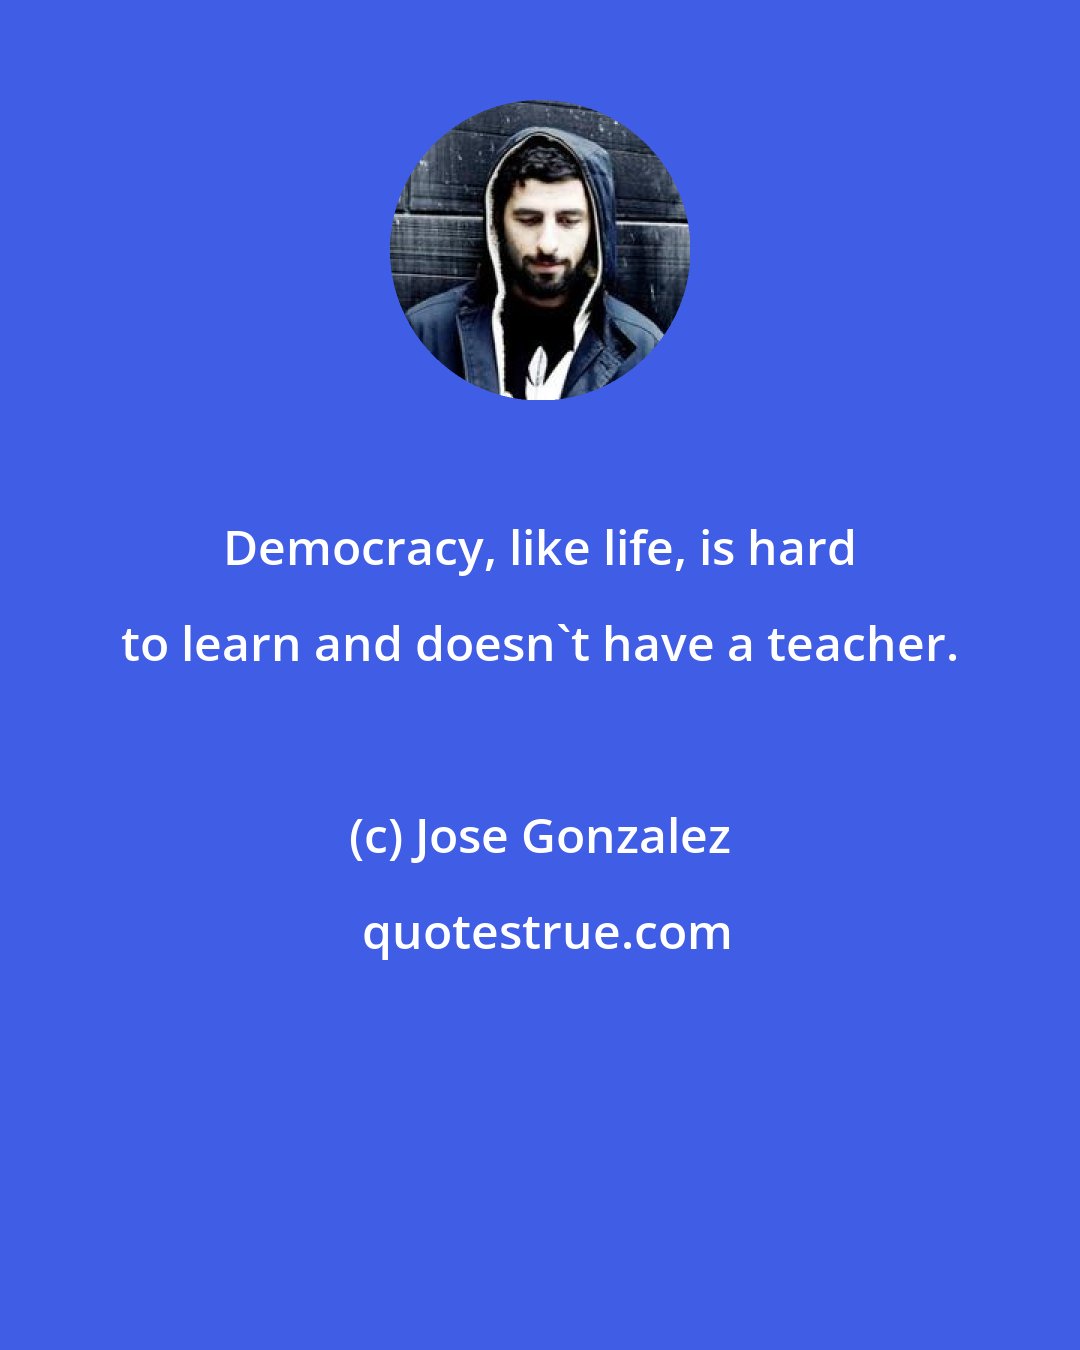 Jose Gonzalez: Democracy, like life, is hard to learn and doesn't have a teacher.